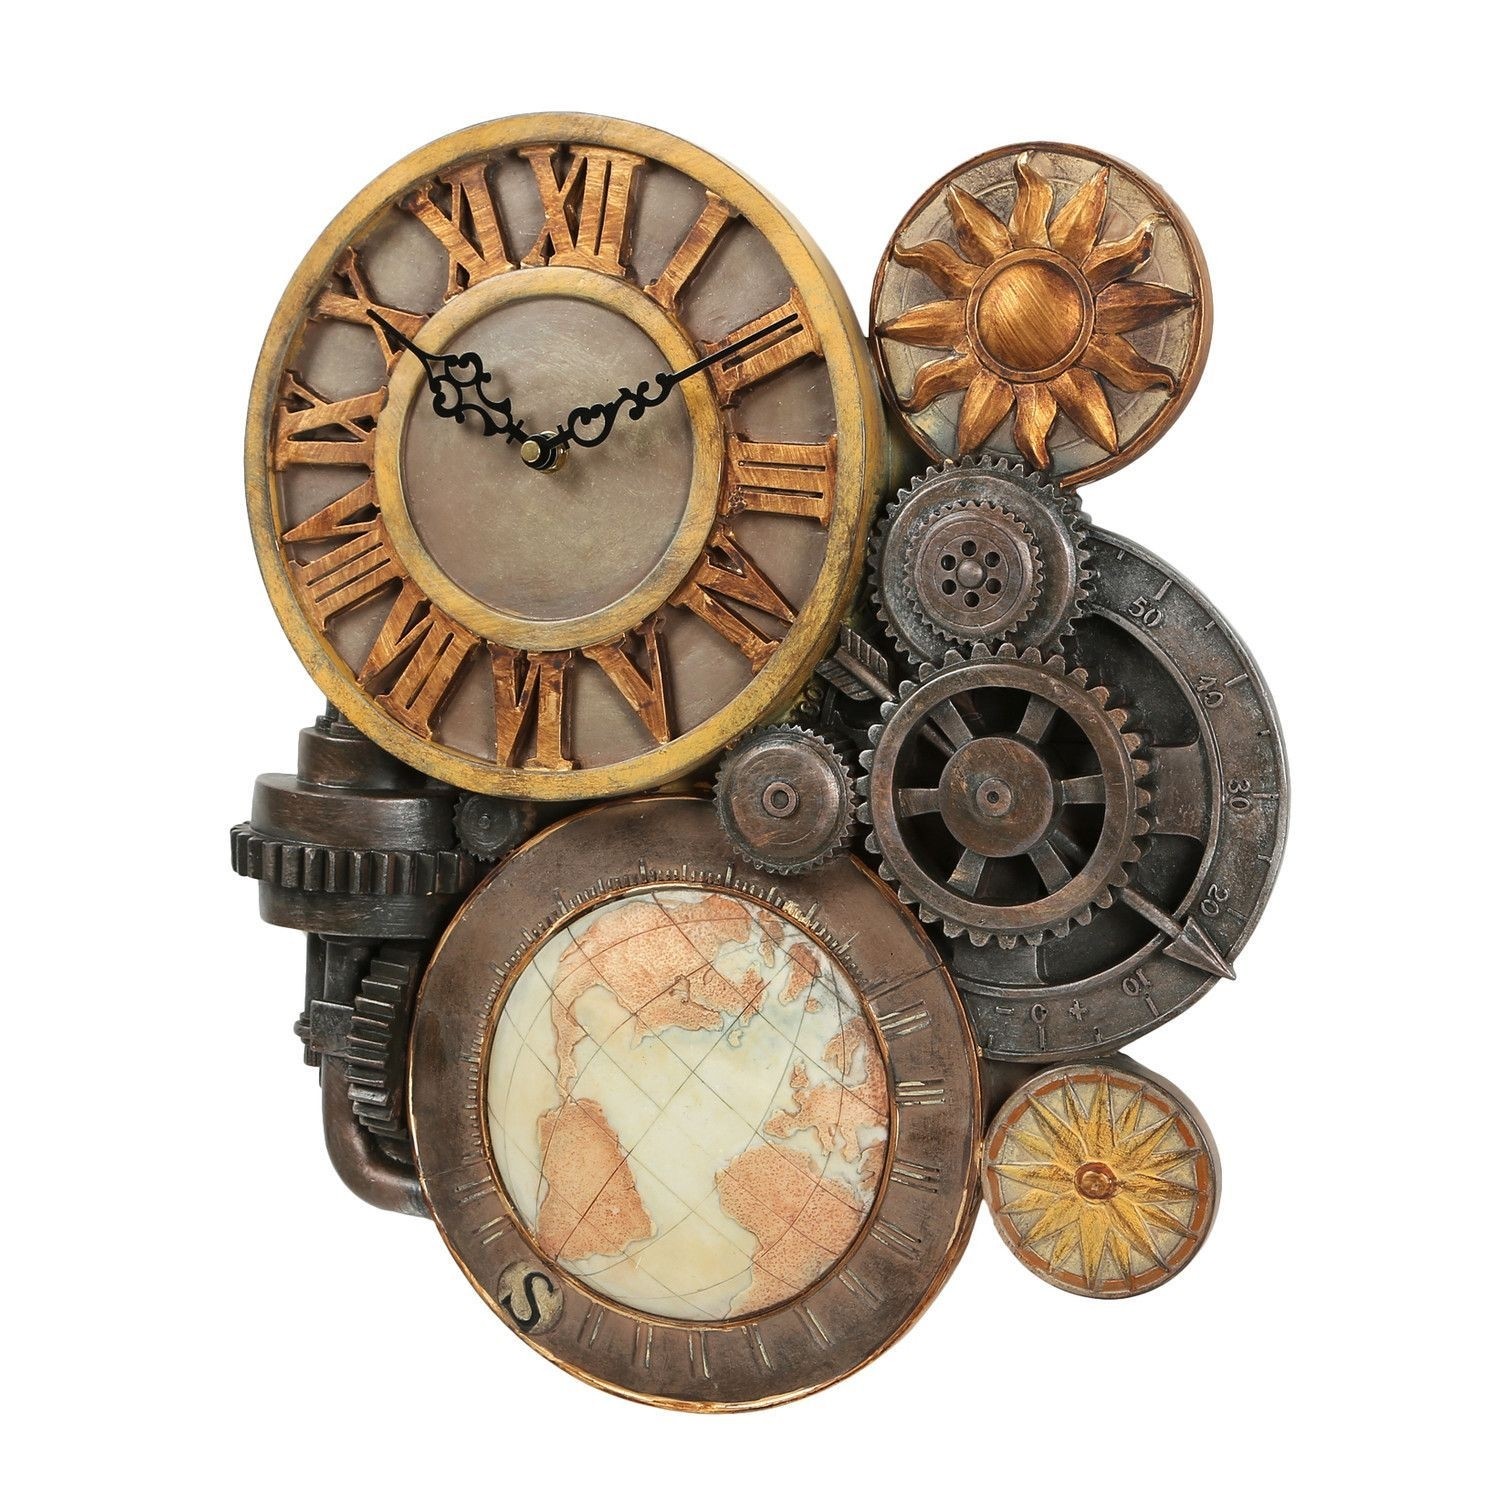 Gears of Time Sculptural Wall Clock